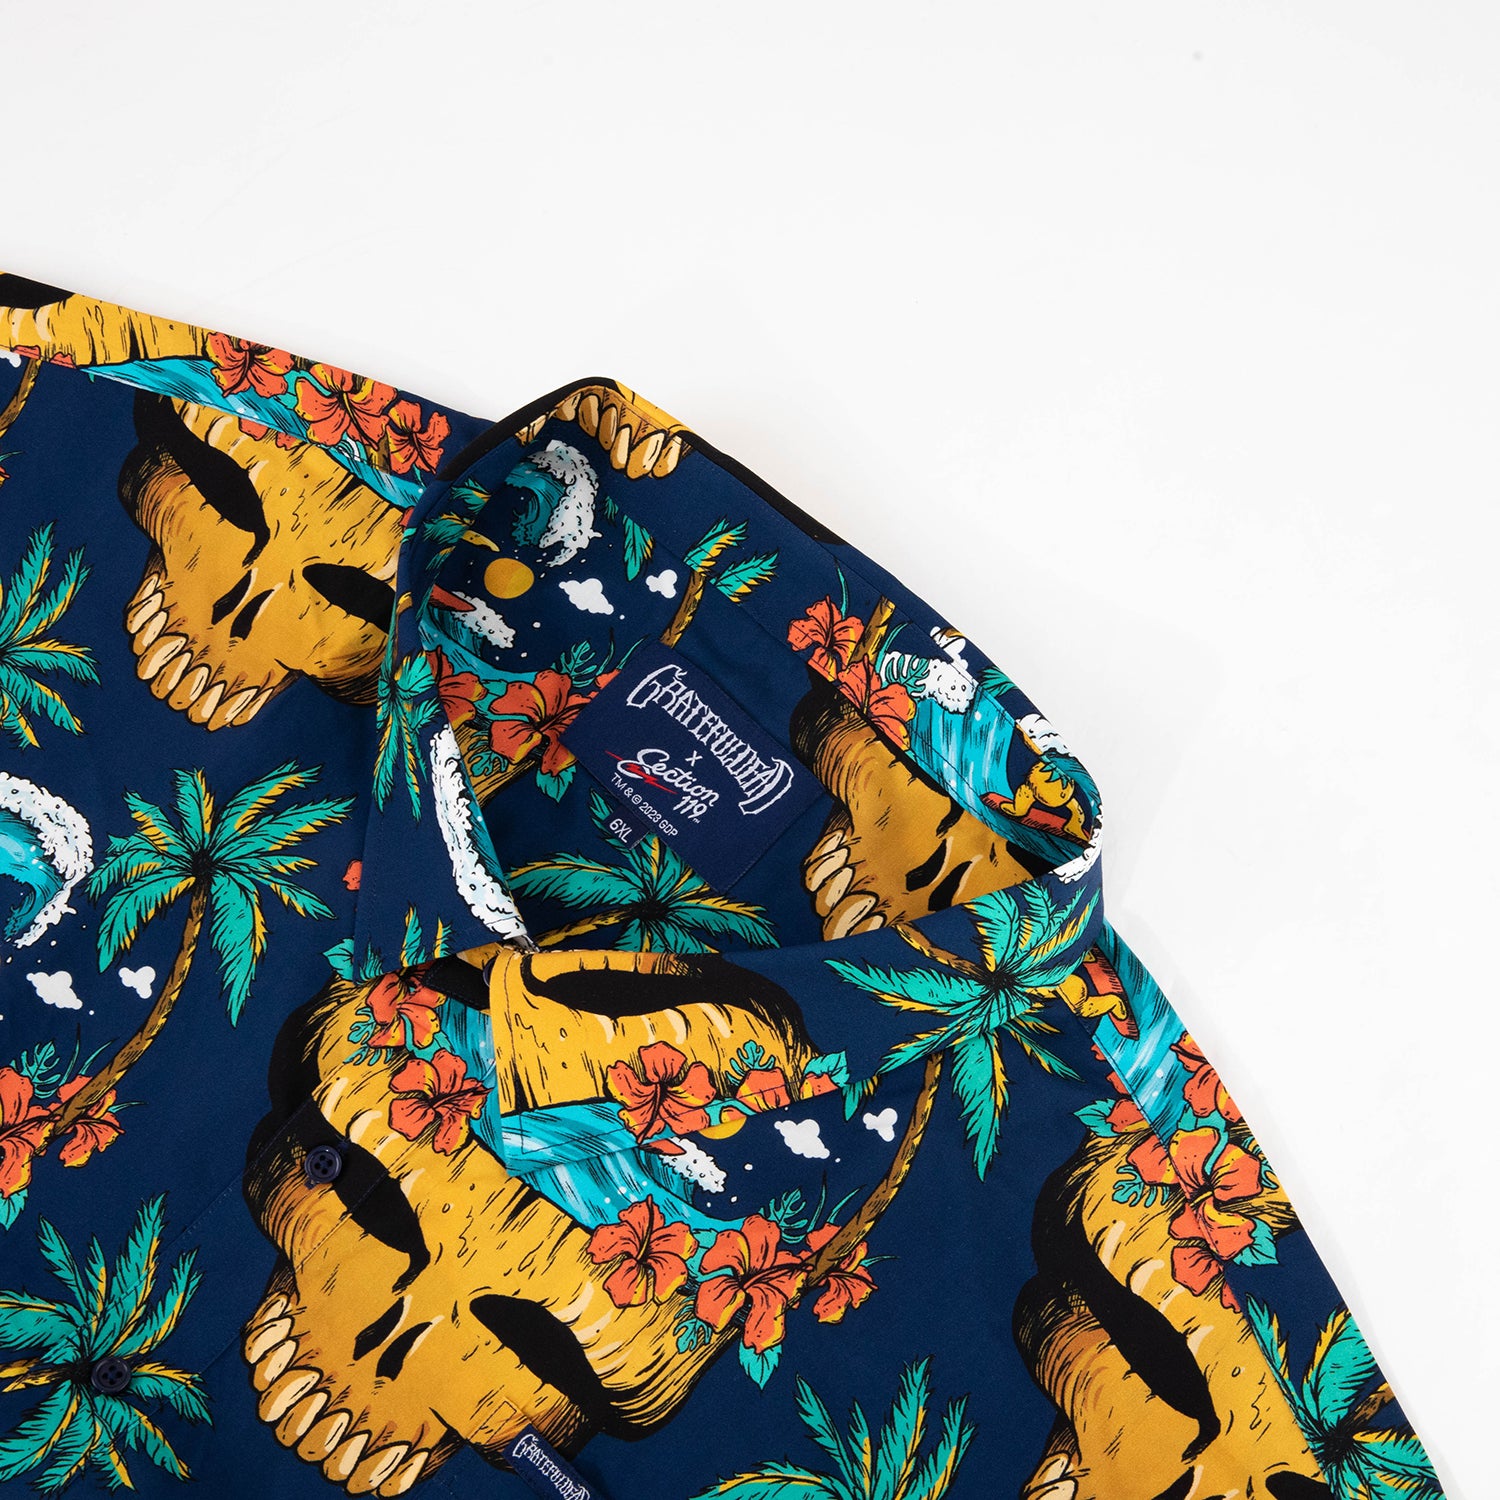 BIG AND TALL Short Sleeve Button Down Surfing Stealie All Over Print Navy - Section 119